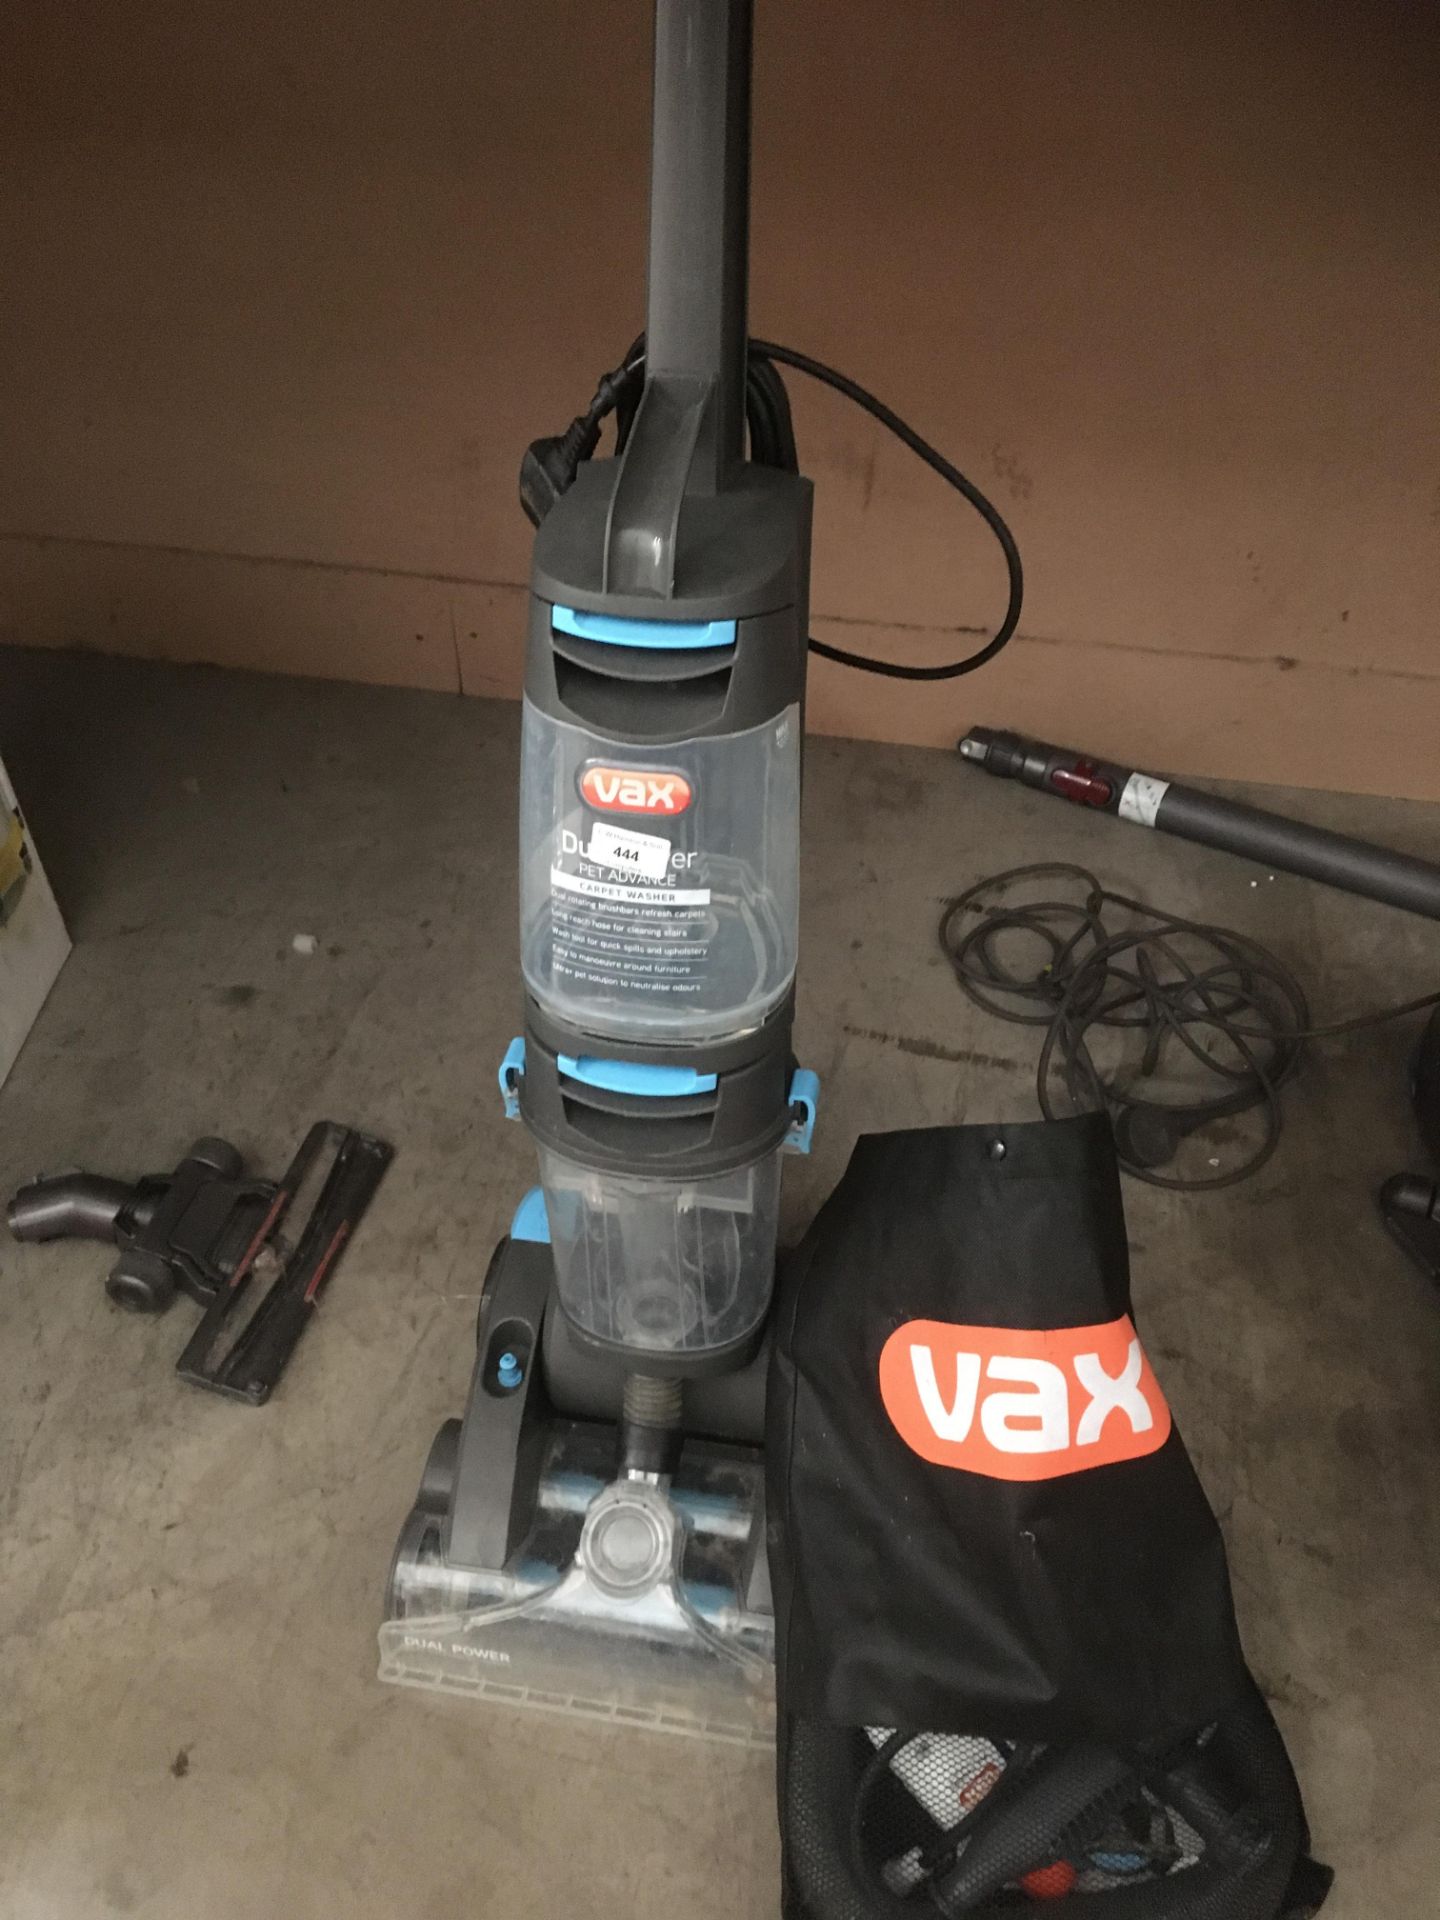 Vax Dual Power vacuum cleaner and bag of attachments